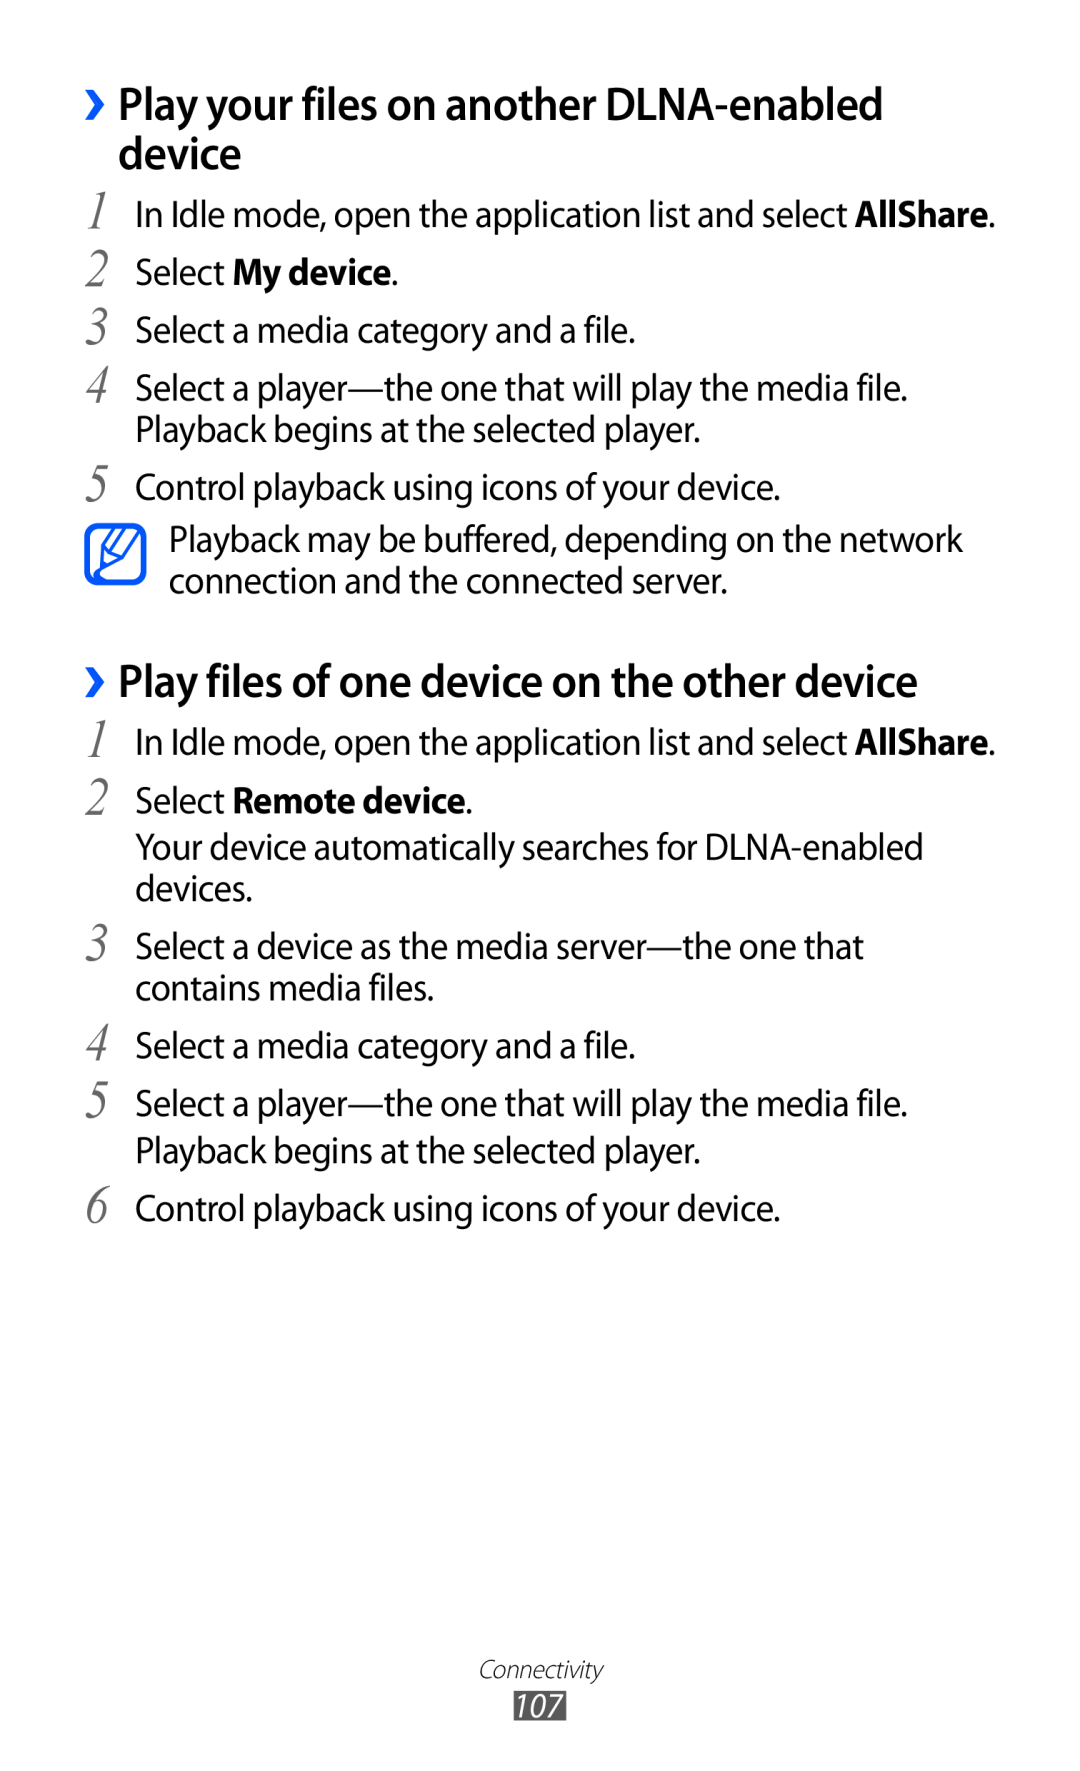 Samsung GT-I9070 ››Play your files on another DLNA-enabled device, ››Play files of one device on the other device 